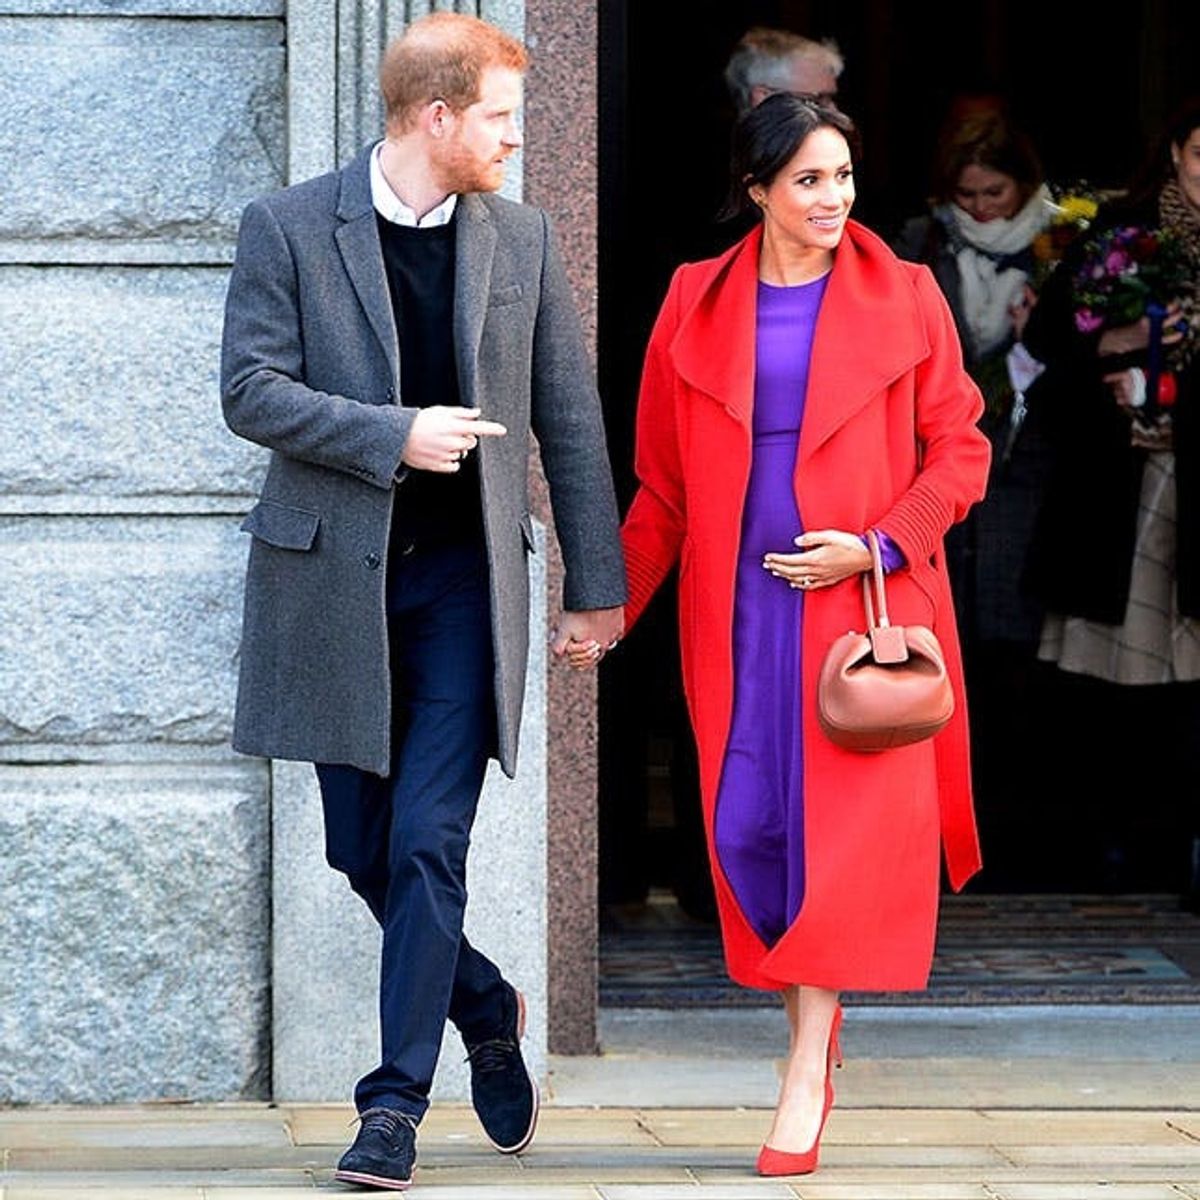 How to Avoid Wearing Maternity Clothes, According to Meghan Markle